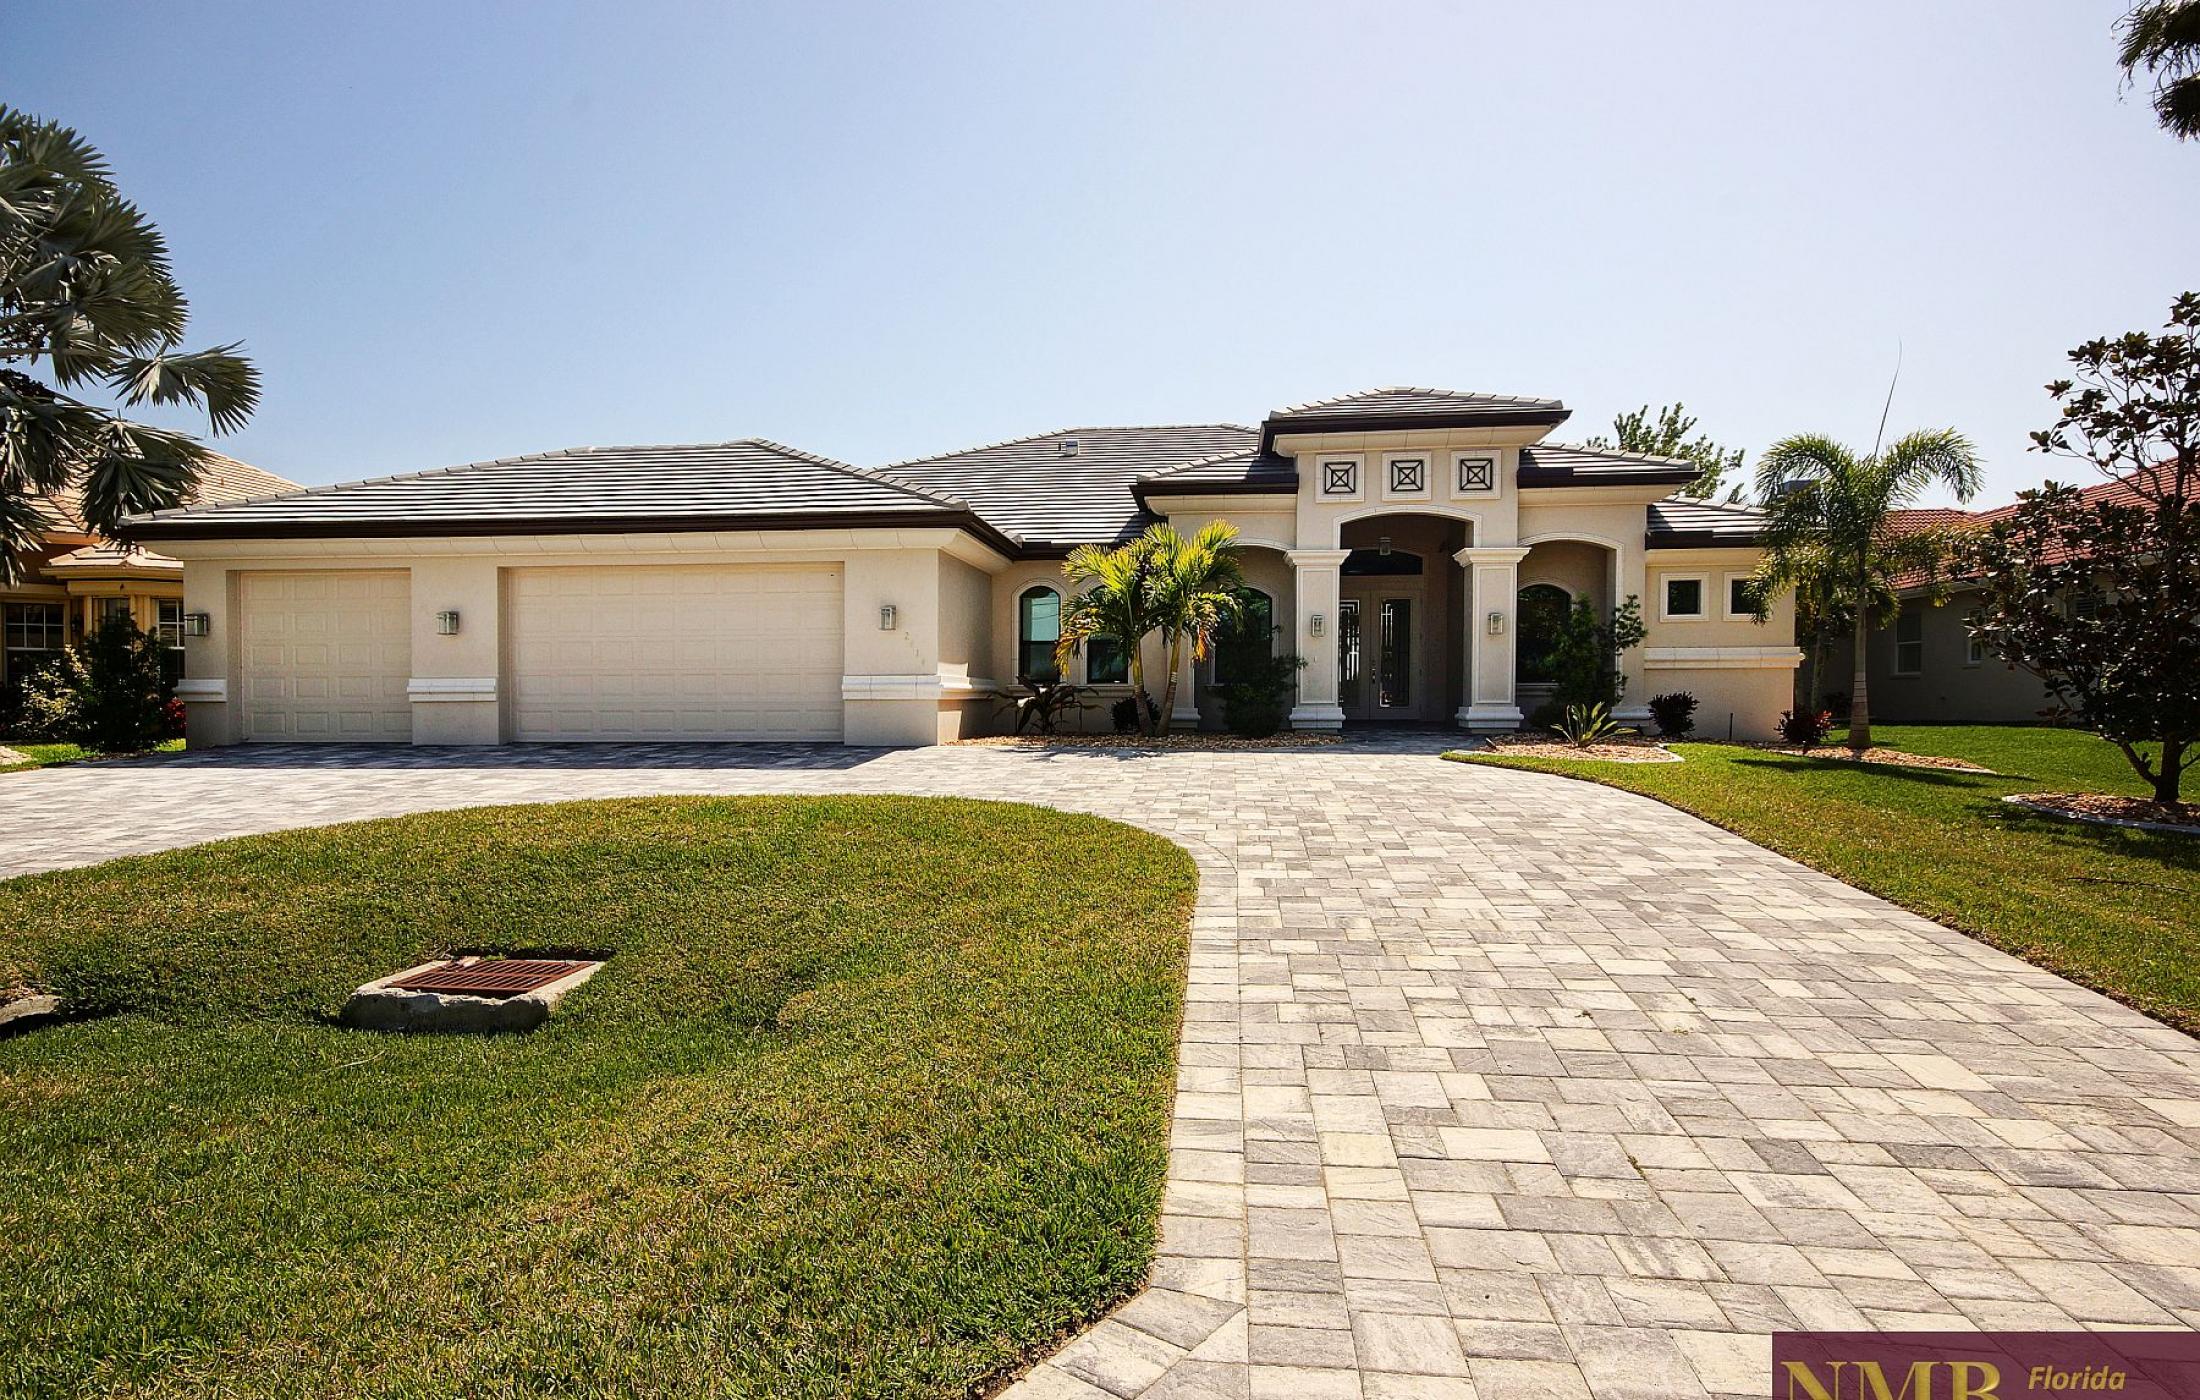 https://www.nmbfloridavacationrentals.com/images/properties/153/Ferienhaus_Cape_Coral_Infinity-front.jpg